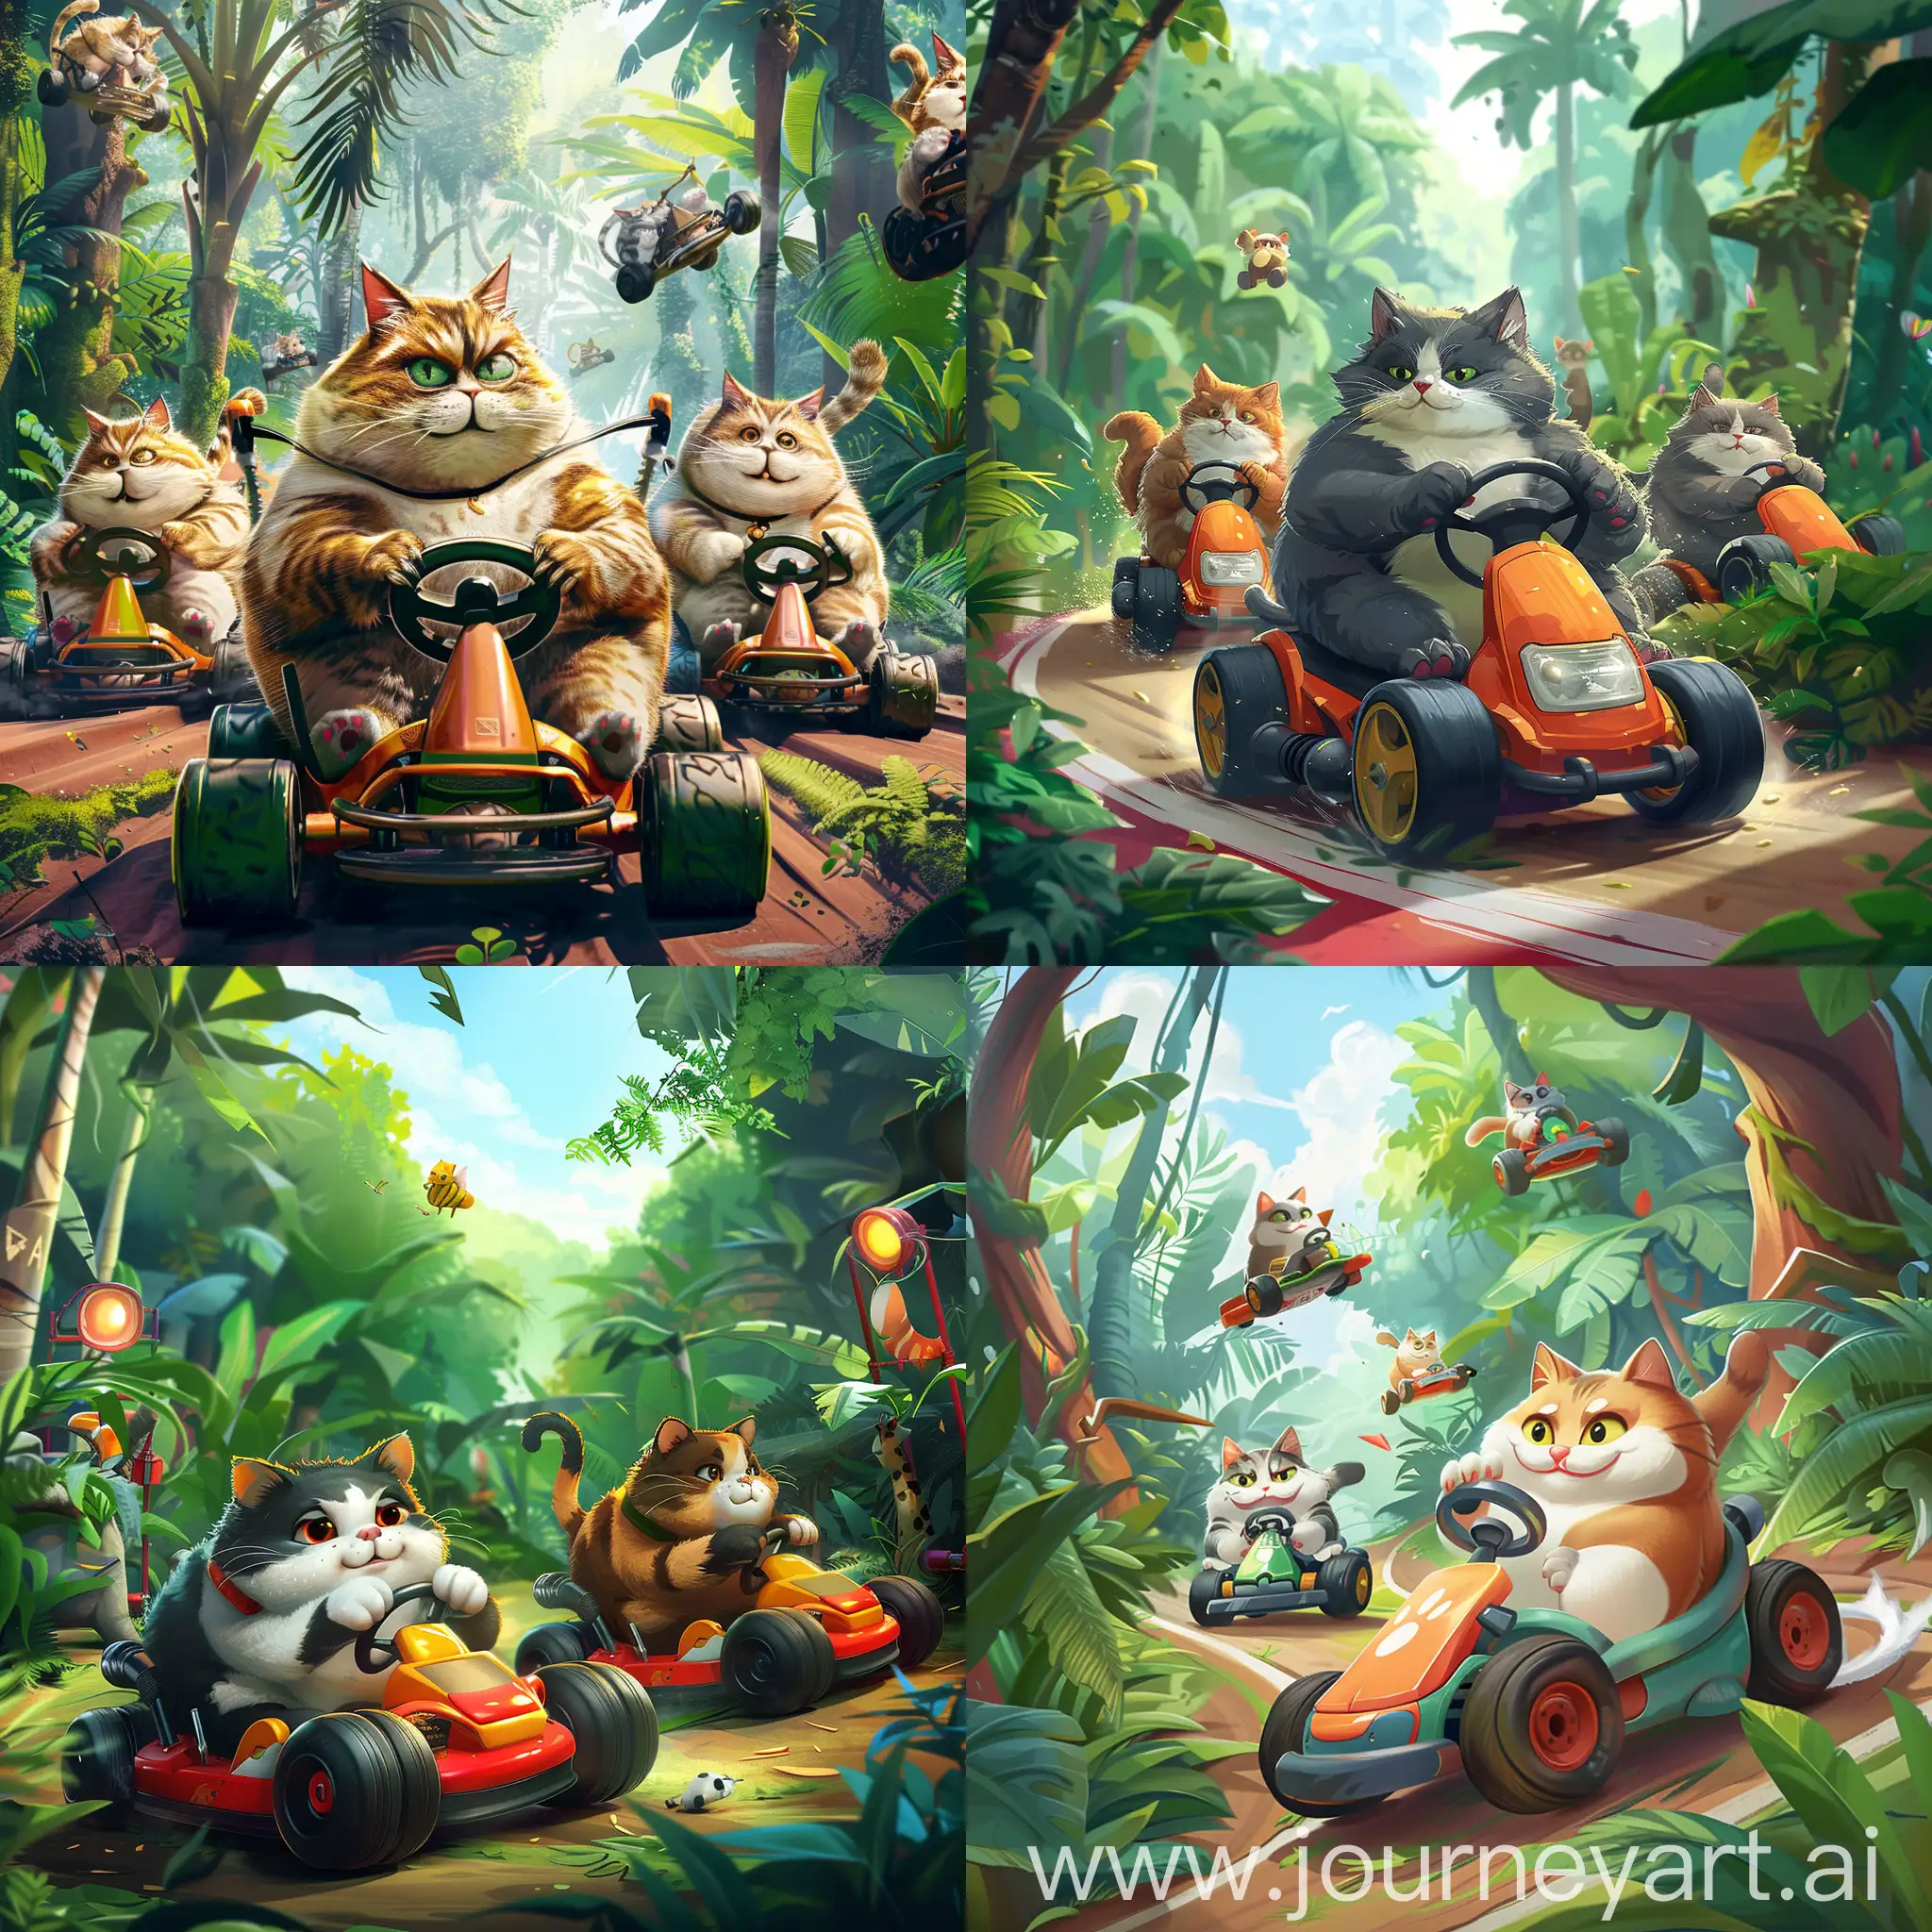 Create poster art for a Kart racing game, but cat themed with fat cats on karts.

Colourful and fun

Jungle background
